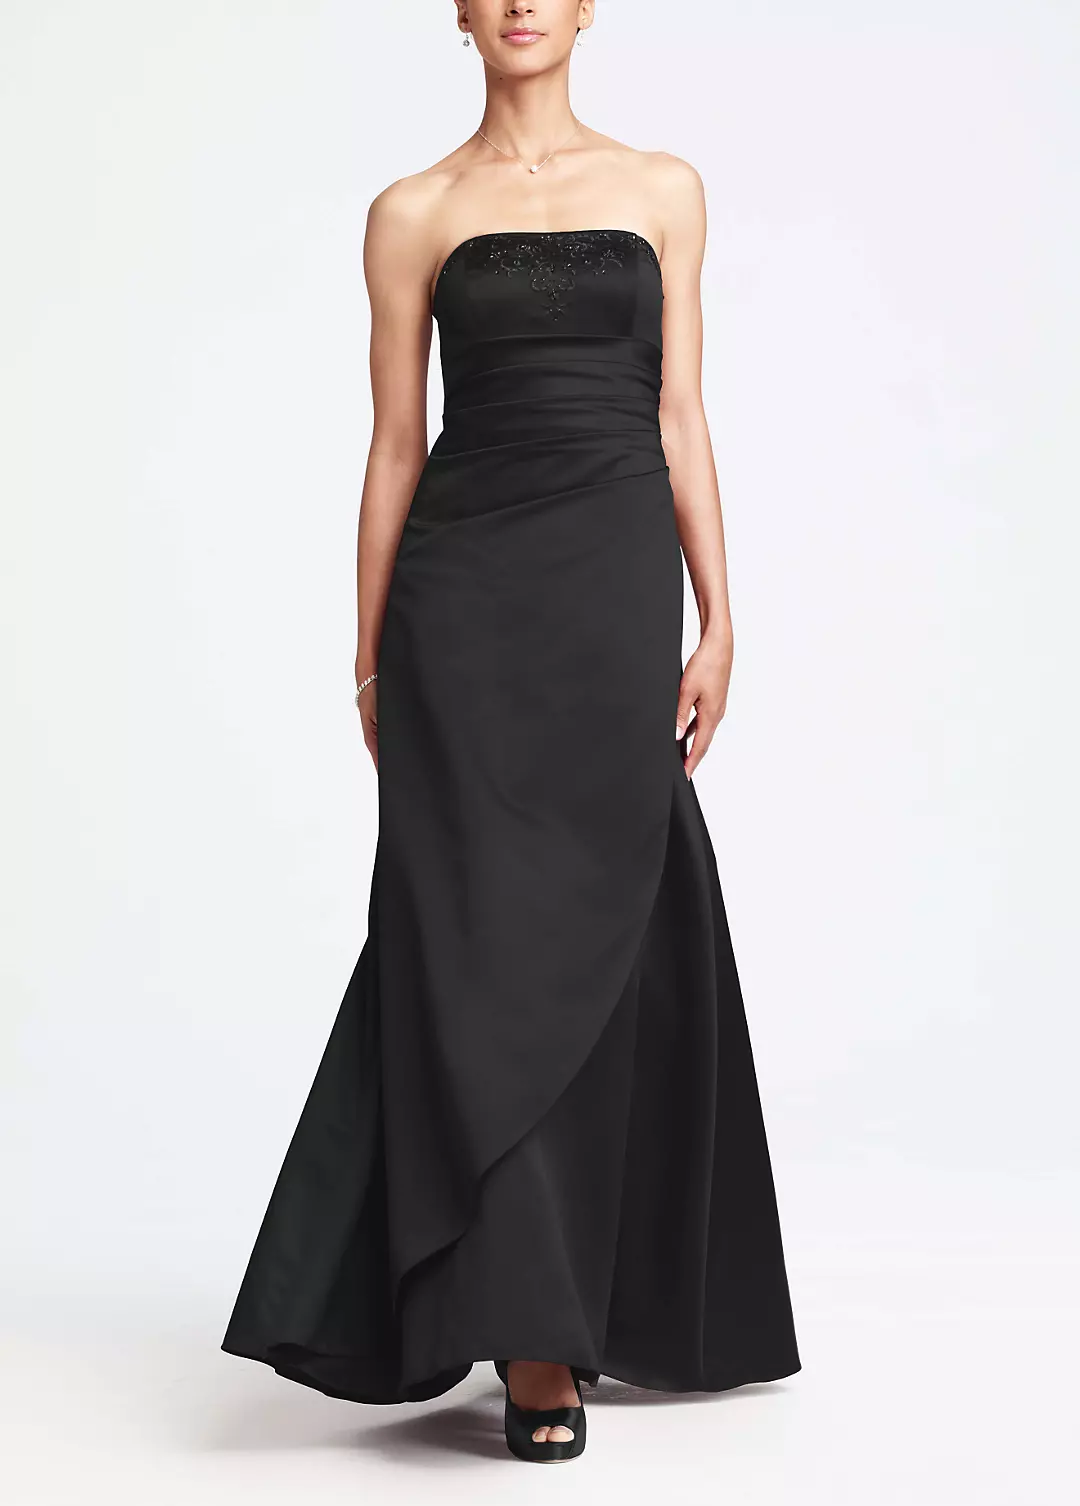 Satin Ball Gown Featuring Side Ruching and Beading Image